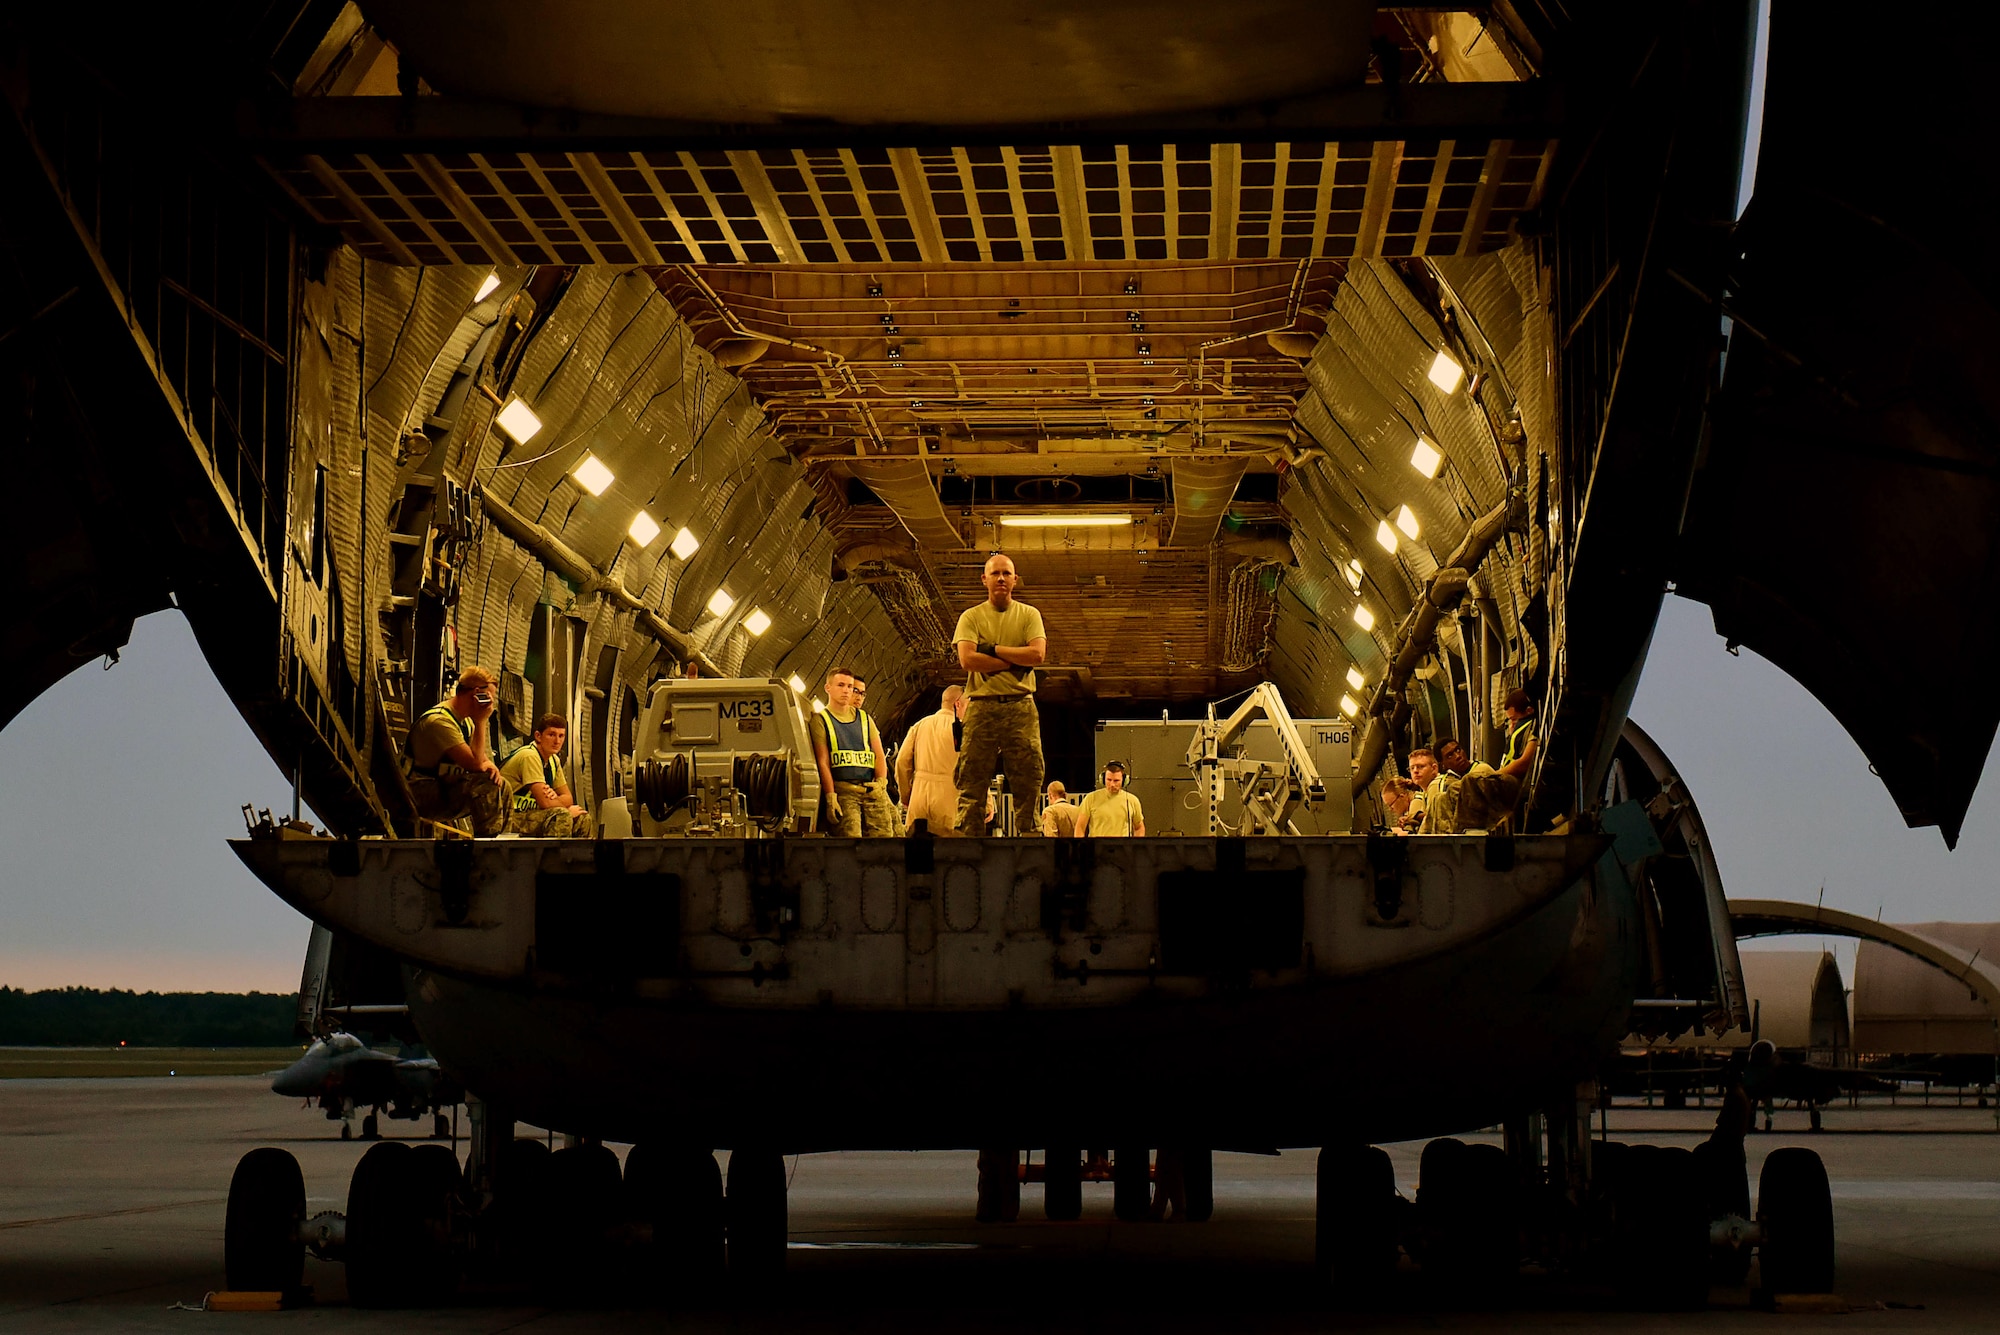 Staff Sgt. Richard Averitt, 4th Logistics Readiness Squadron air transportation specialist, waits for cargo to be loaded on a C-5M Super Galaxy, Sept. 29, 2017, at Seymour Johnson AFB, North Carolina. The 4th LRS provides worldwide logistics support for the 4th Fighter Wing. (U.S. Air Force photo by Airman 1st Class Victoria Boyton)